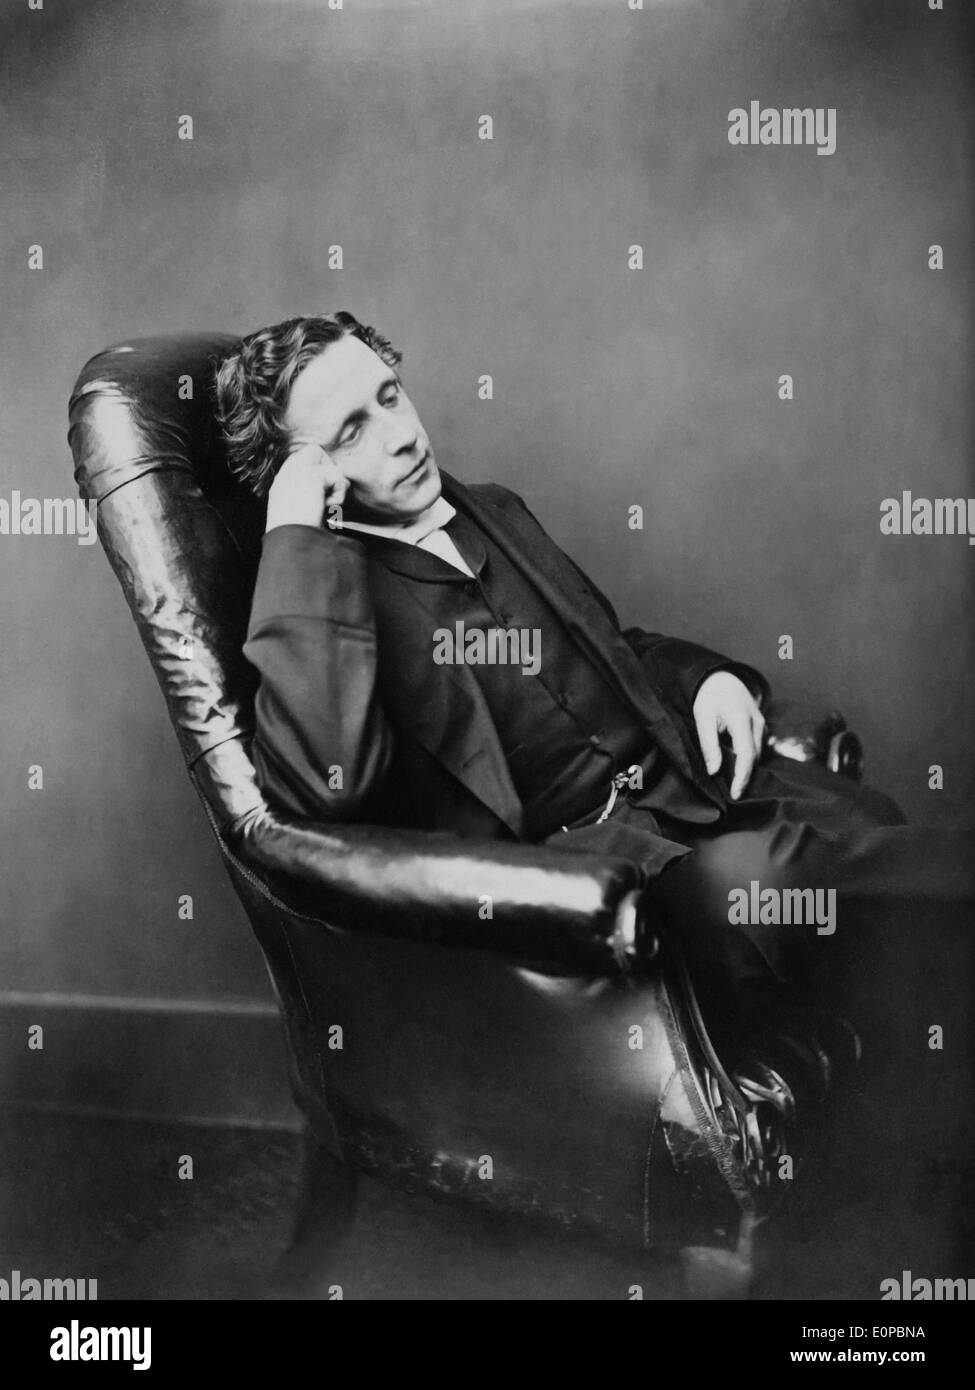 Lewis Carroll (1832-1898), English author, mathematician and photographer. Born Charles Lutwidge Dodgson, he adopted the pen name Lewis Carroll publishing Alice's Adventures in Wonderland in 1865. Stock Photo